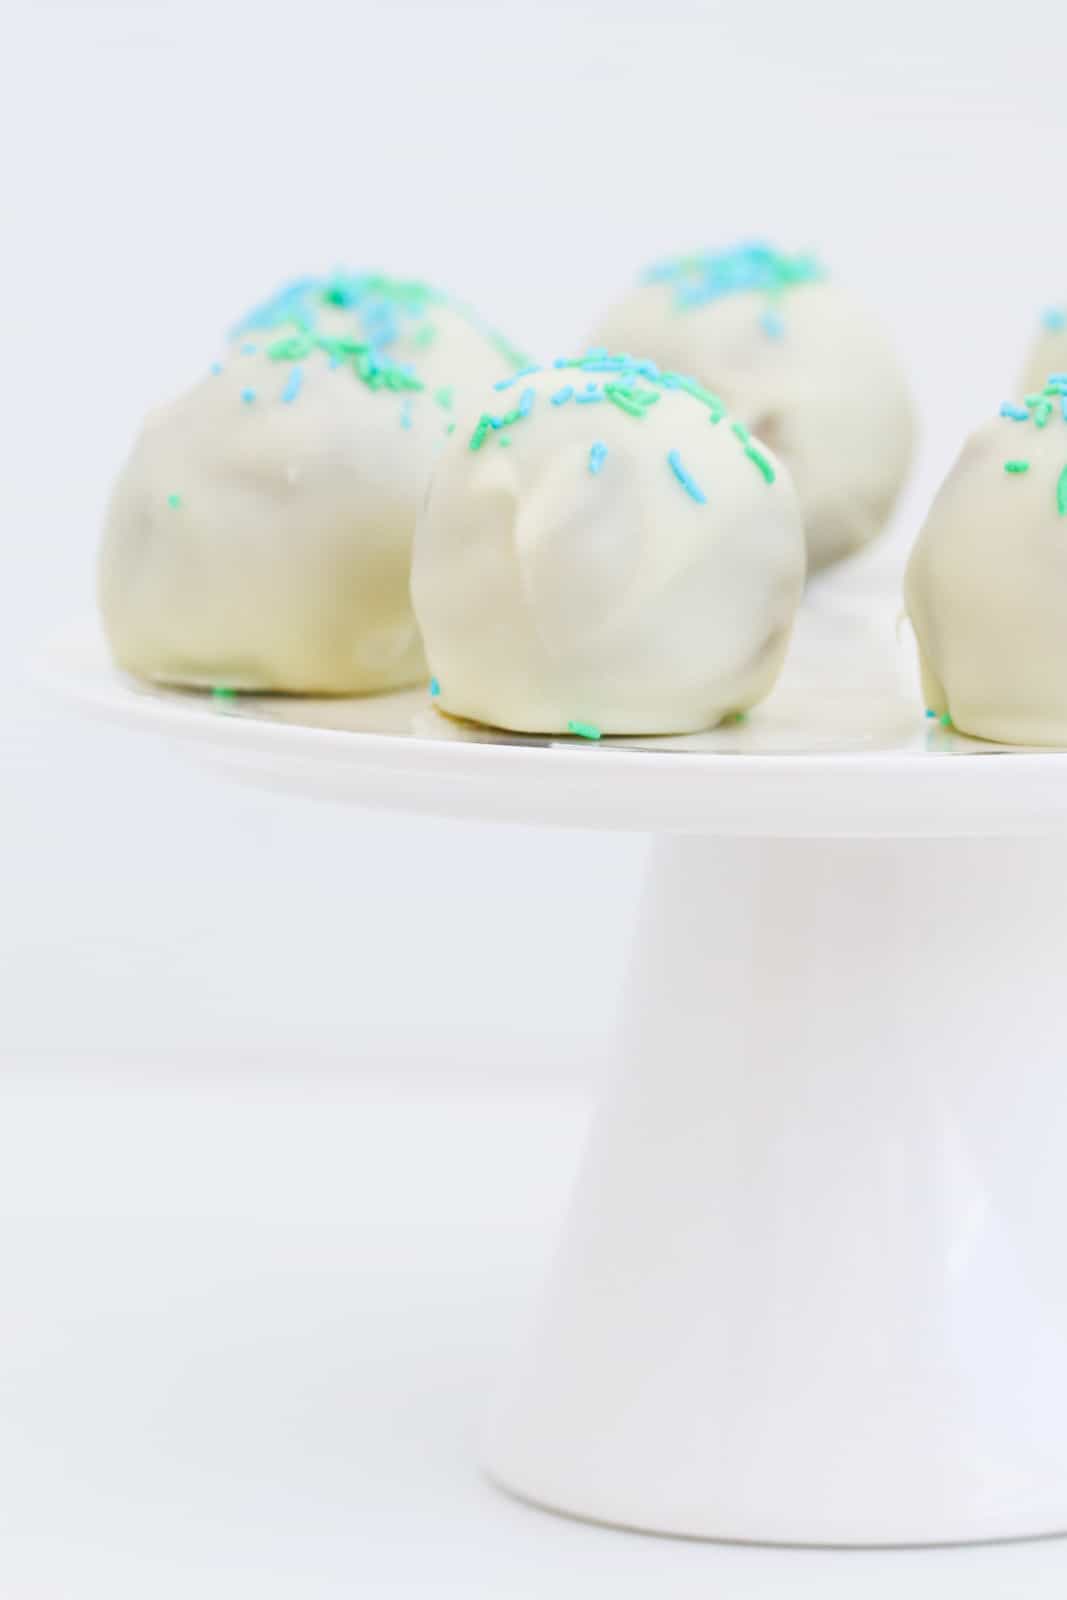 A close up of Peppermint Crisp Tim Tam balls with green sprinkles.